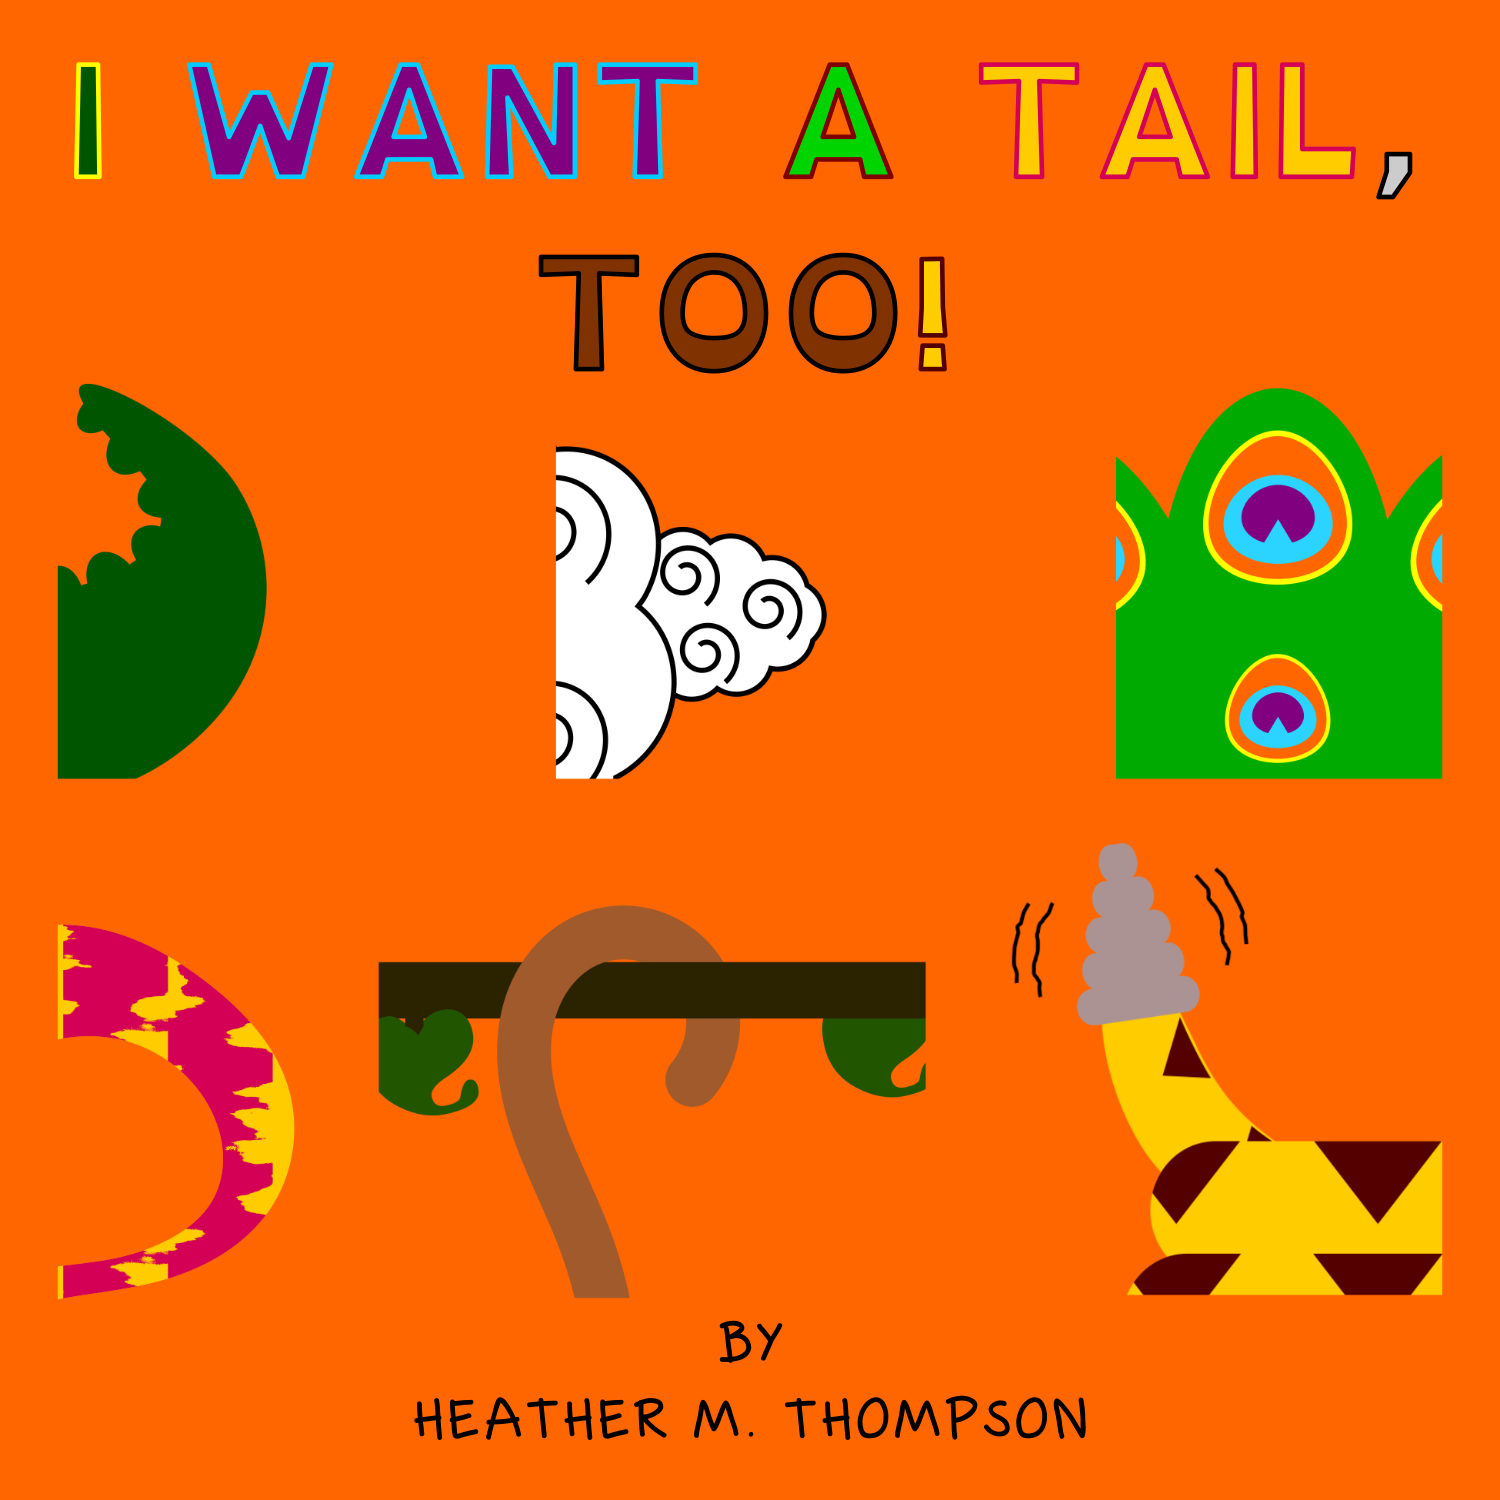 Cover for "I Want a Tail, Too!" courtesy of Heather Thompson. 